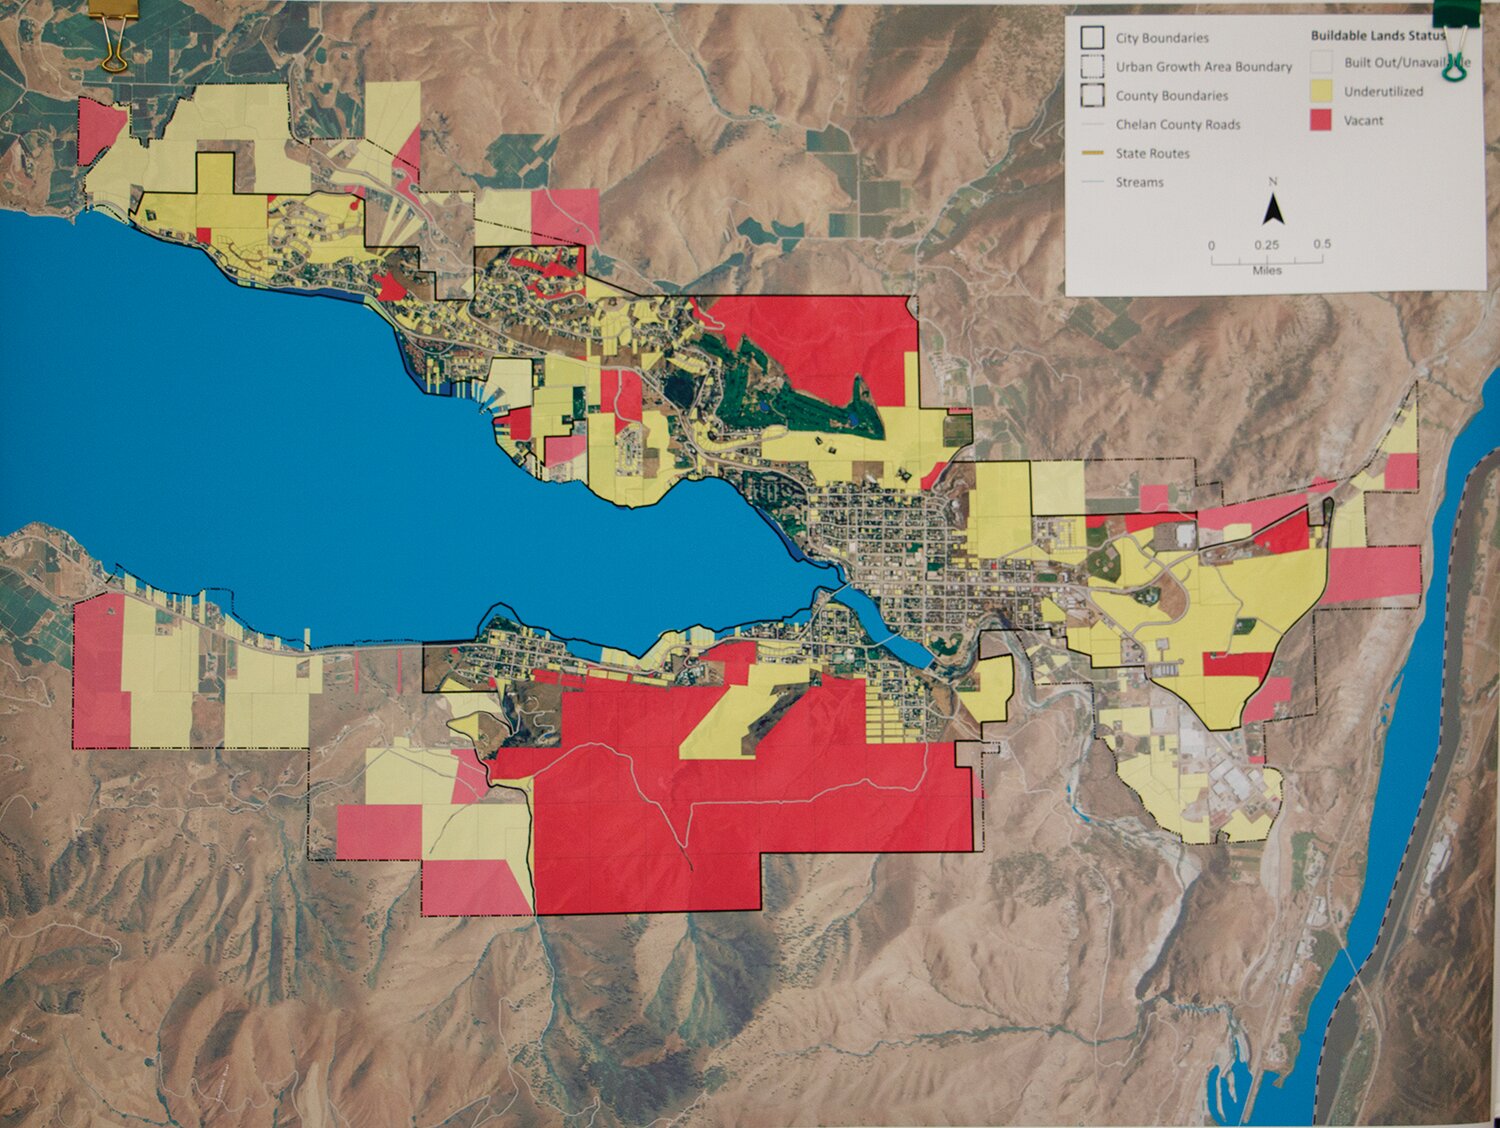 City of Chelan map displaying both vacant (red areas) and underutilized (yellow areas) areas available for development.